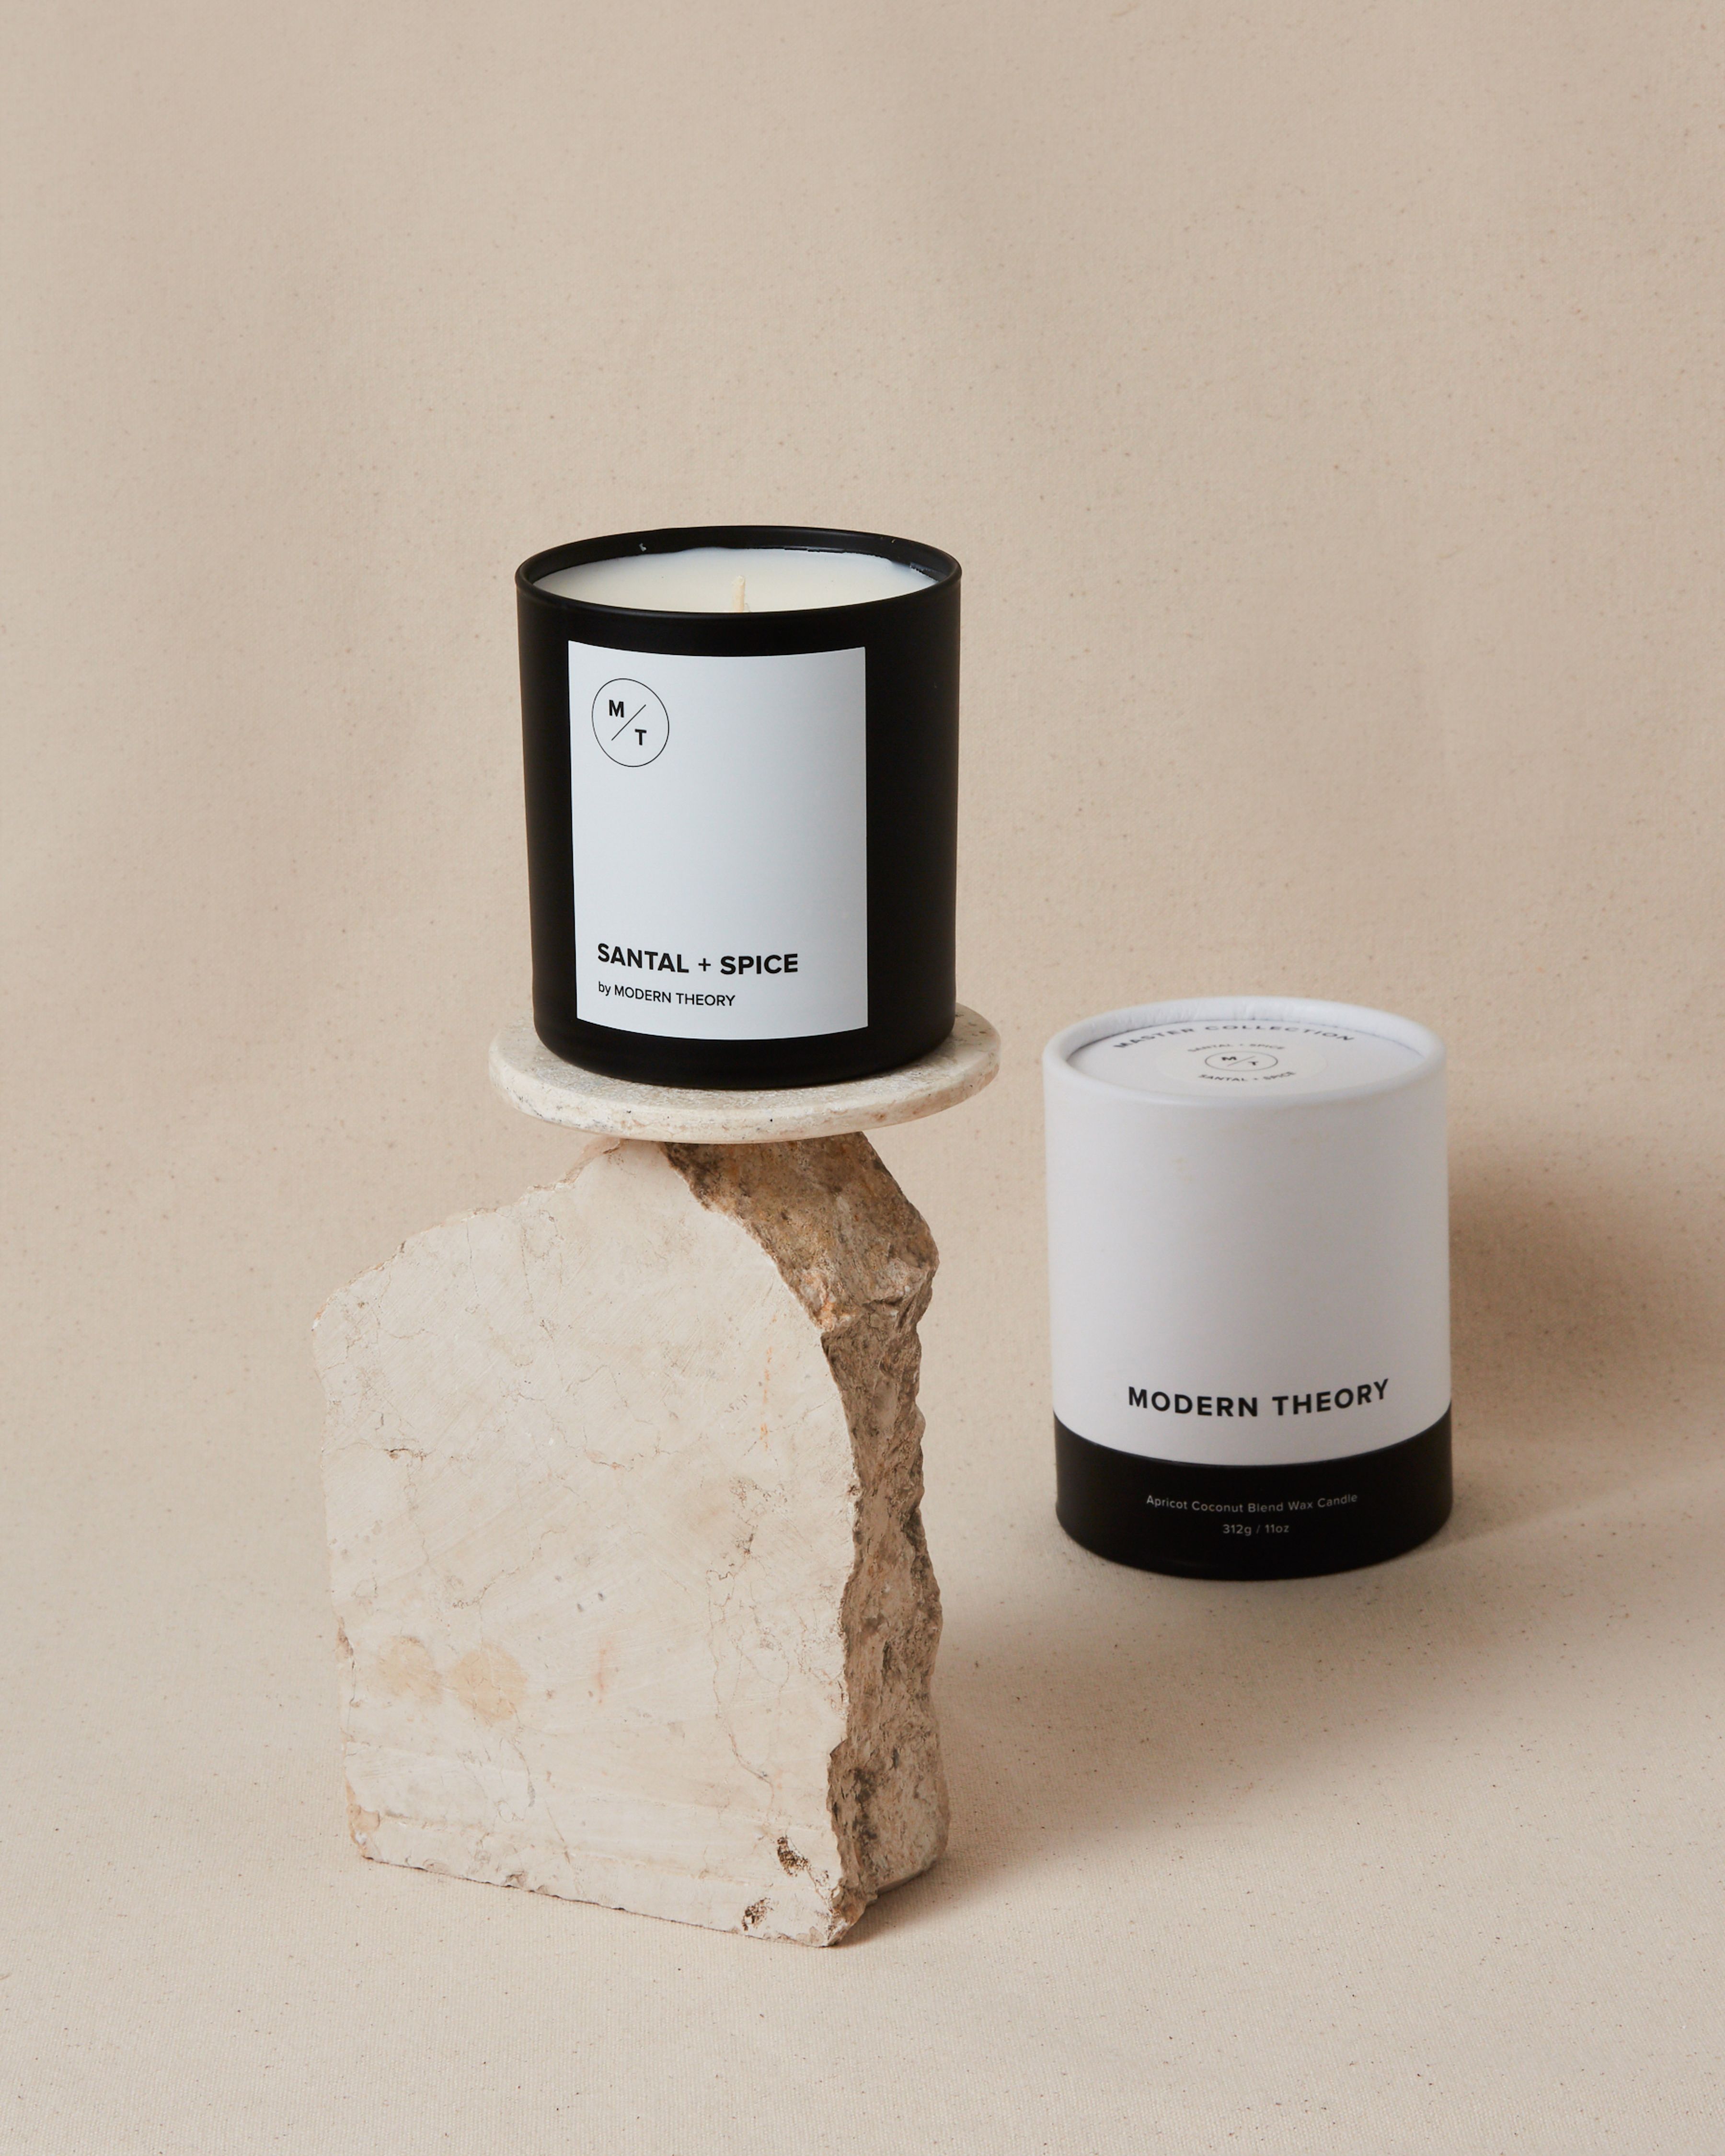 Product Image for Santal + Spice Candle